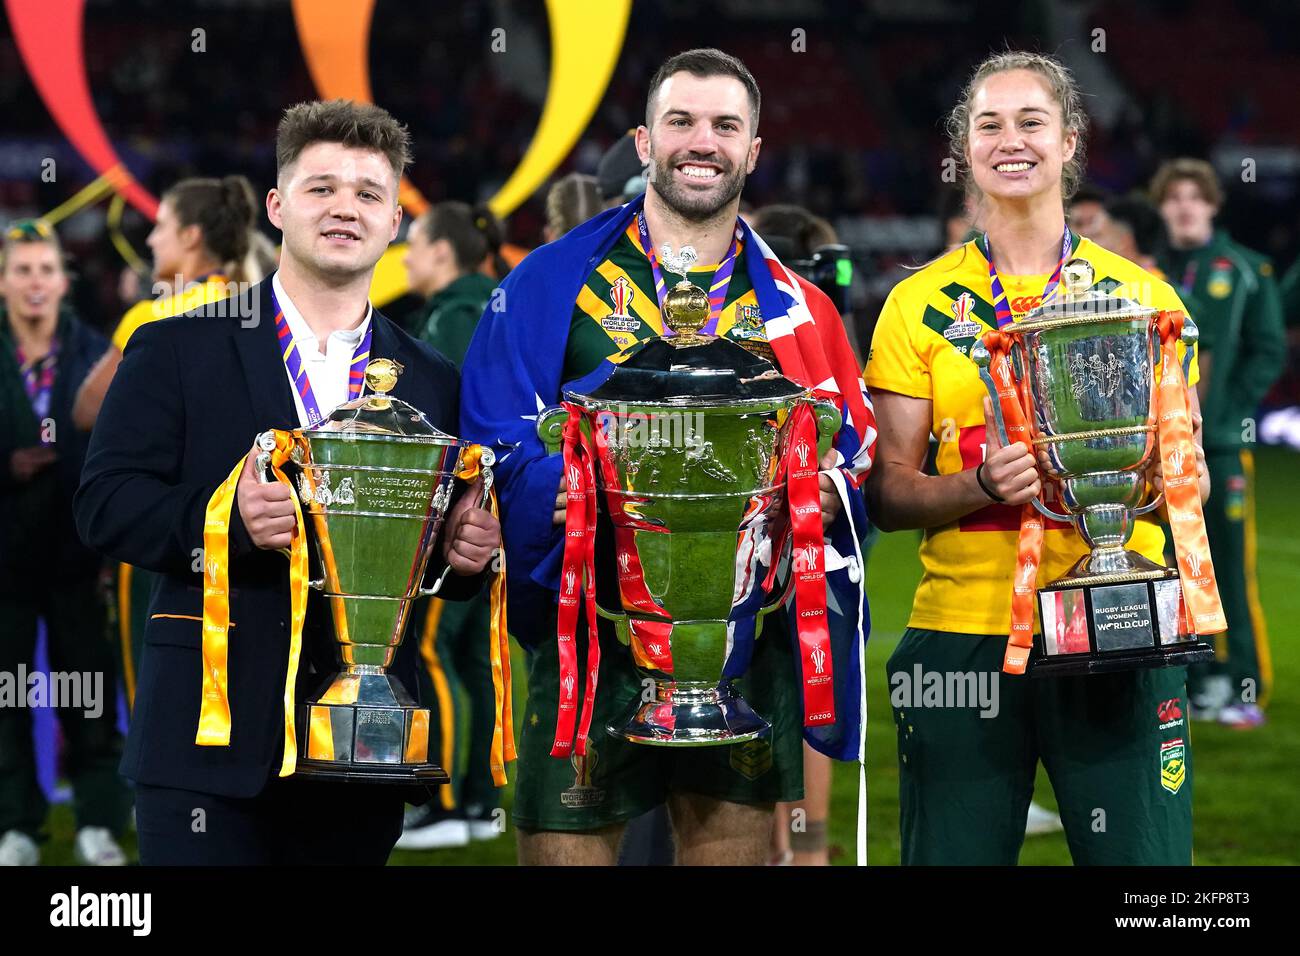 Australia's James Tedesco (centre) with the men's trophy, Australia's Kezie Apps (right) with the women's trophy and England's Tom Halliwell with the wheelchair trophy after the Rugby League World Cup final at Old Trafford, Manchester. Picture date: Saturday November 19, 2022. Stock Photo